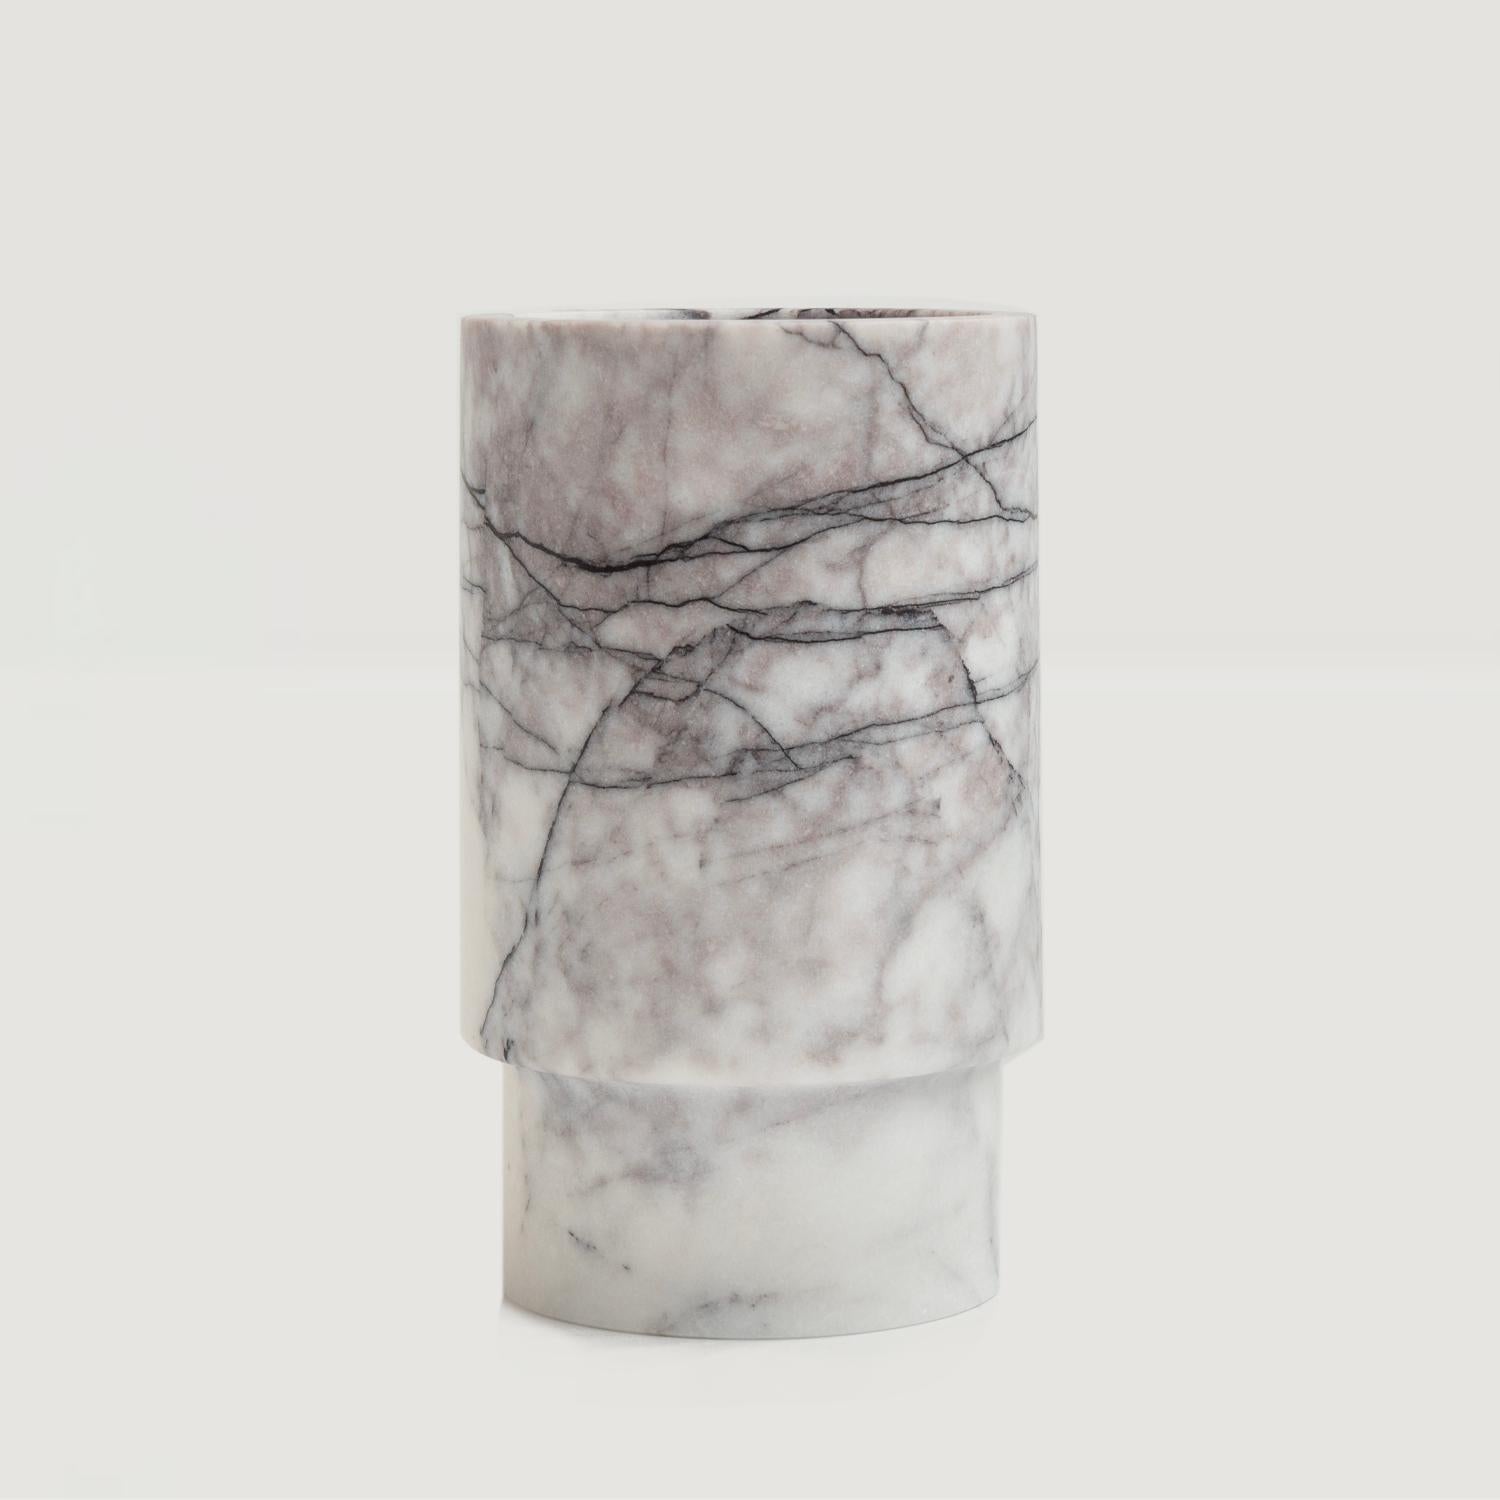 Crafted from a natural marble, this vase will be sure to win your heart. It can be used to hold your wine bottle, blooms, kitchen utensils and so much more. Place it in amongst your decor objects for a truly outstanding textural ornament.

Overall